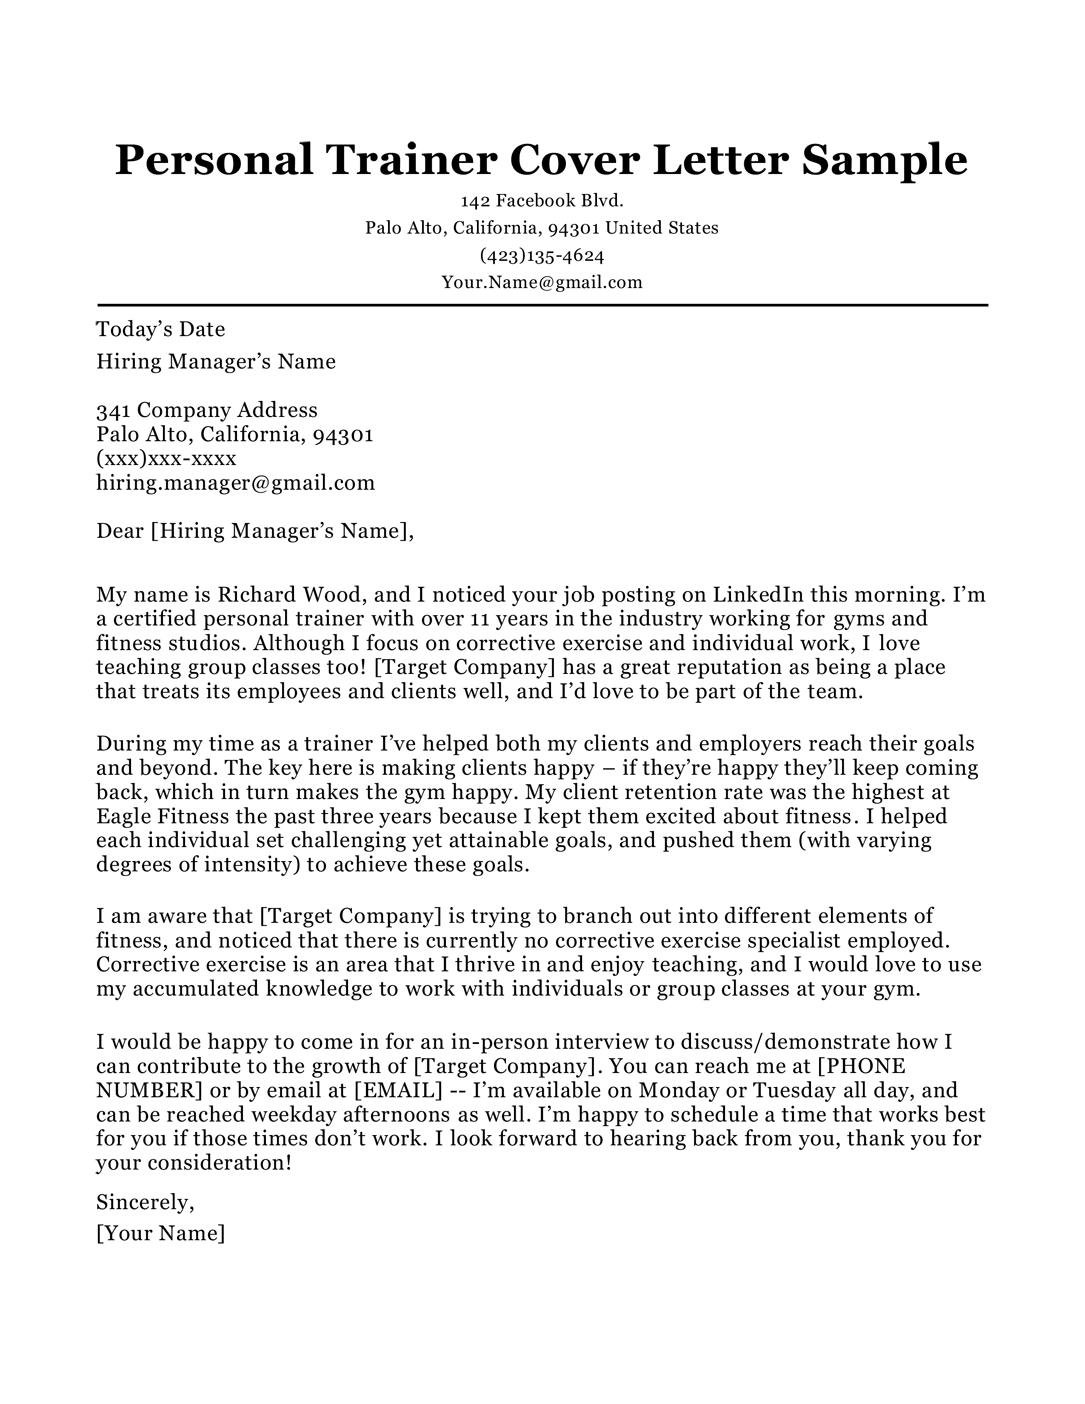 Personal trainer cover letter sample